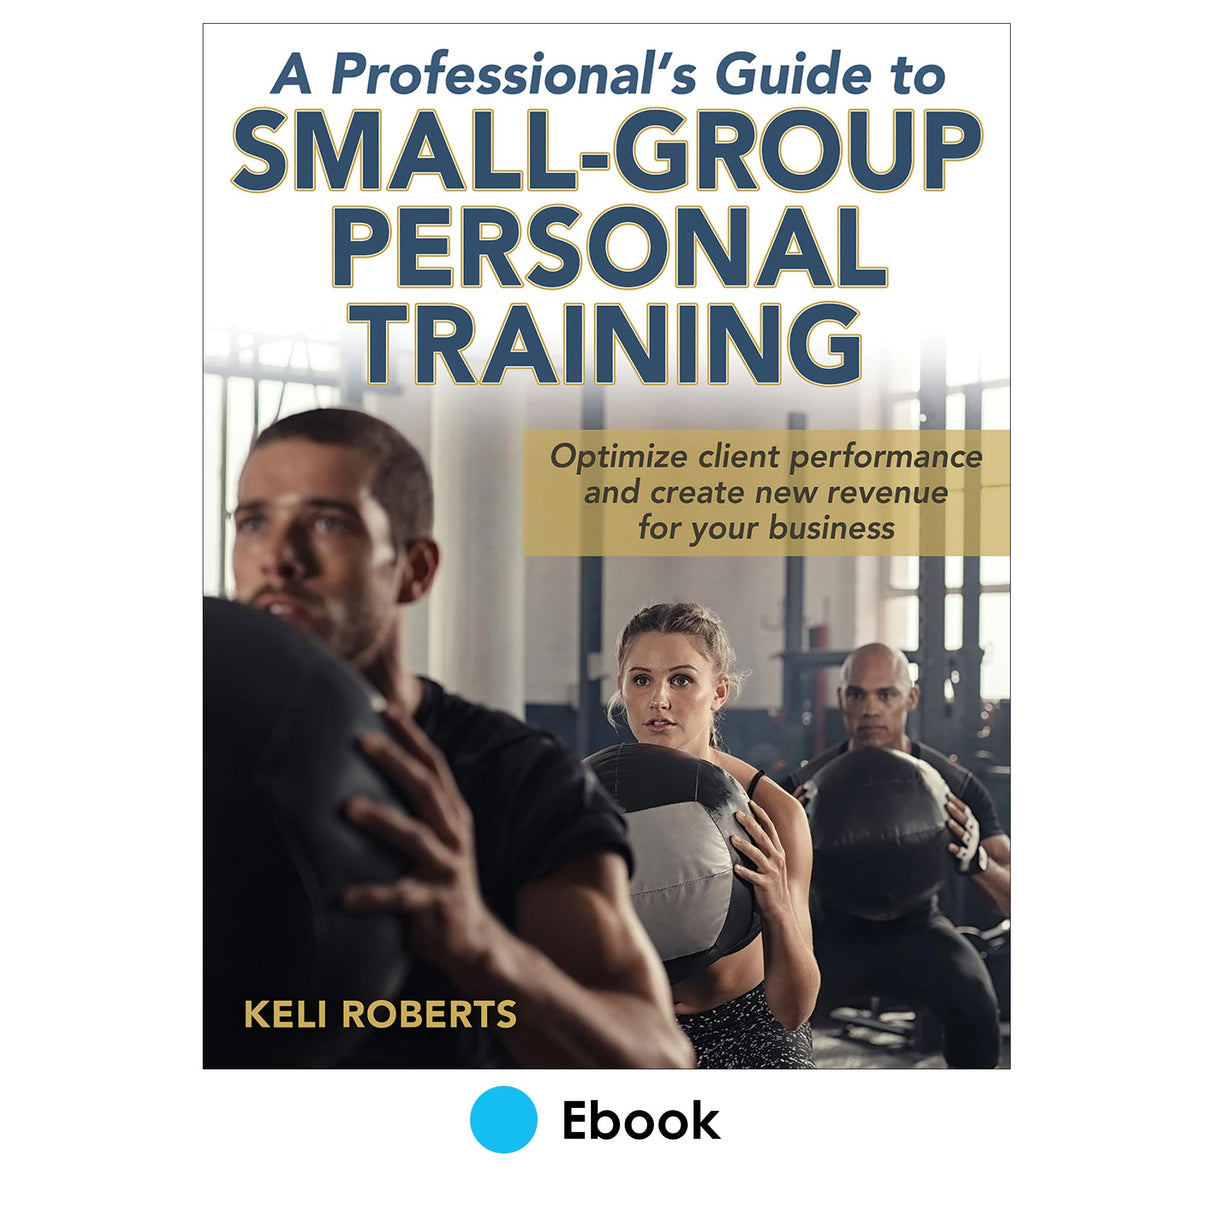 Professional's Guide to Small-Group Personal Training epub, A